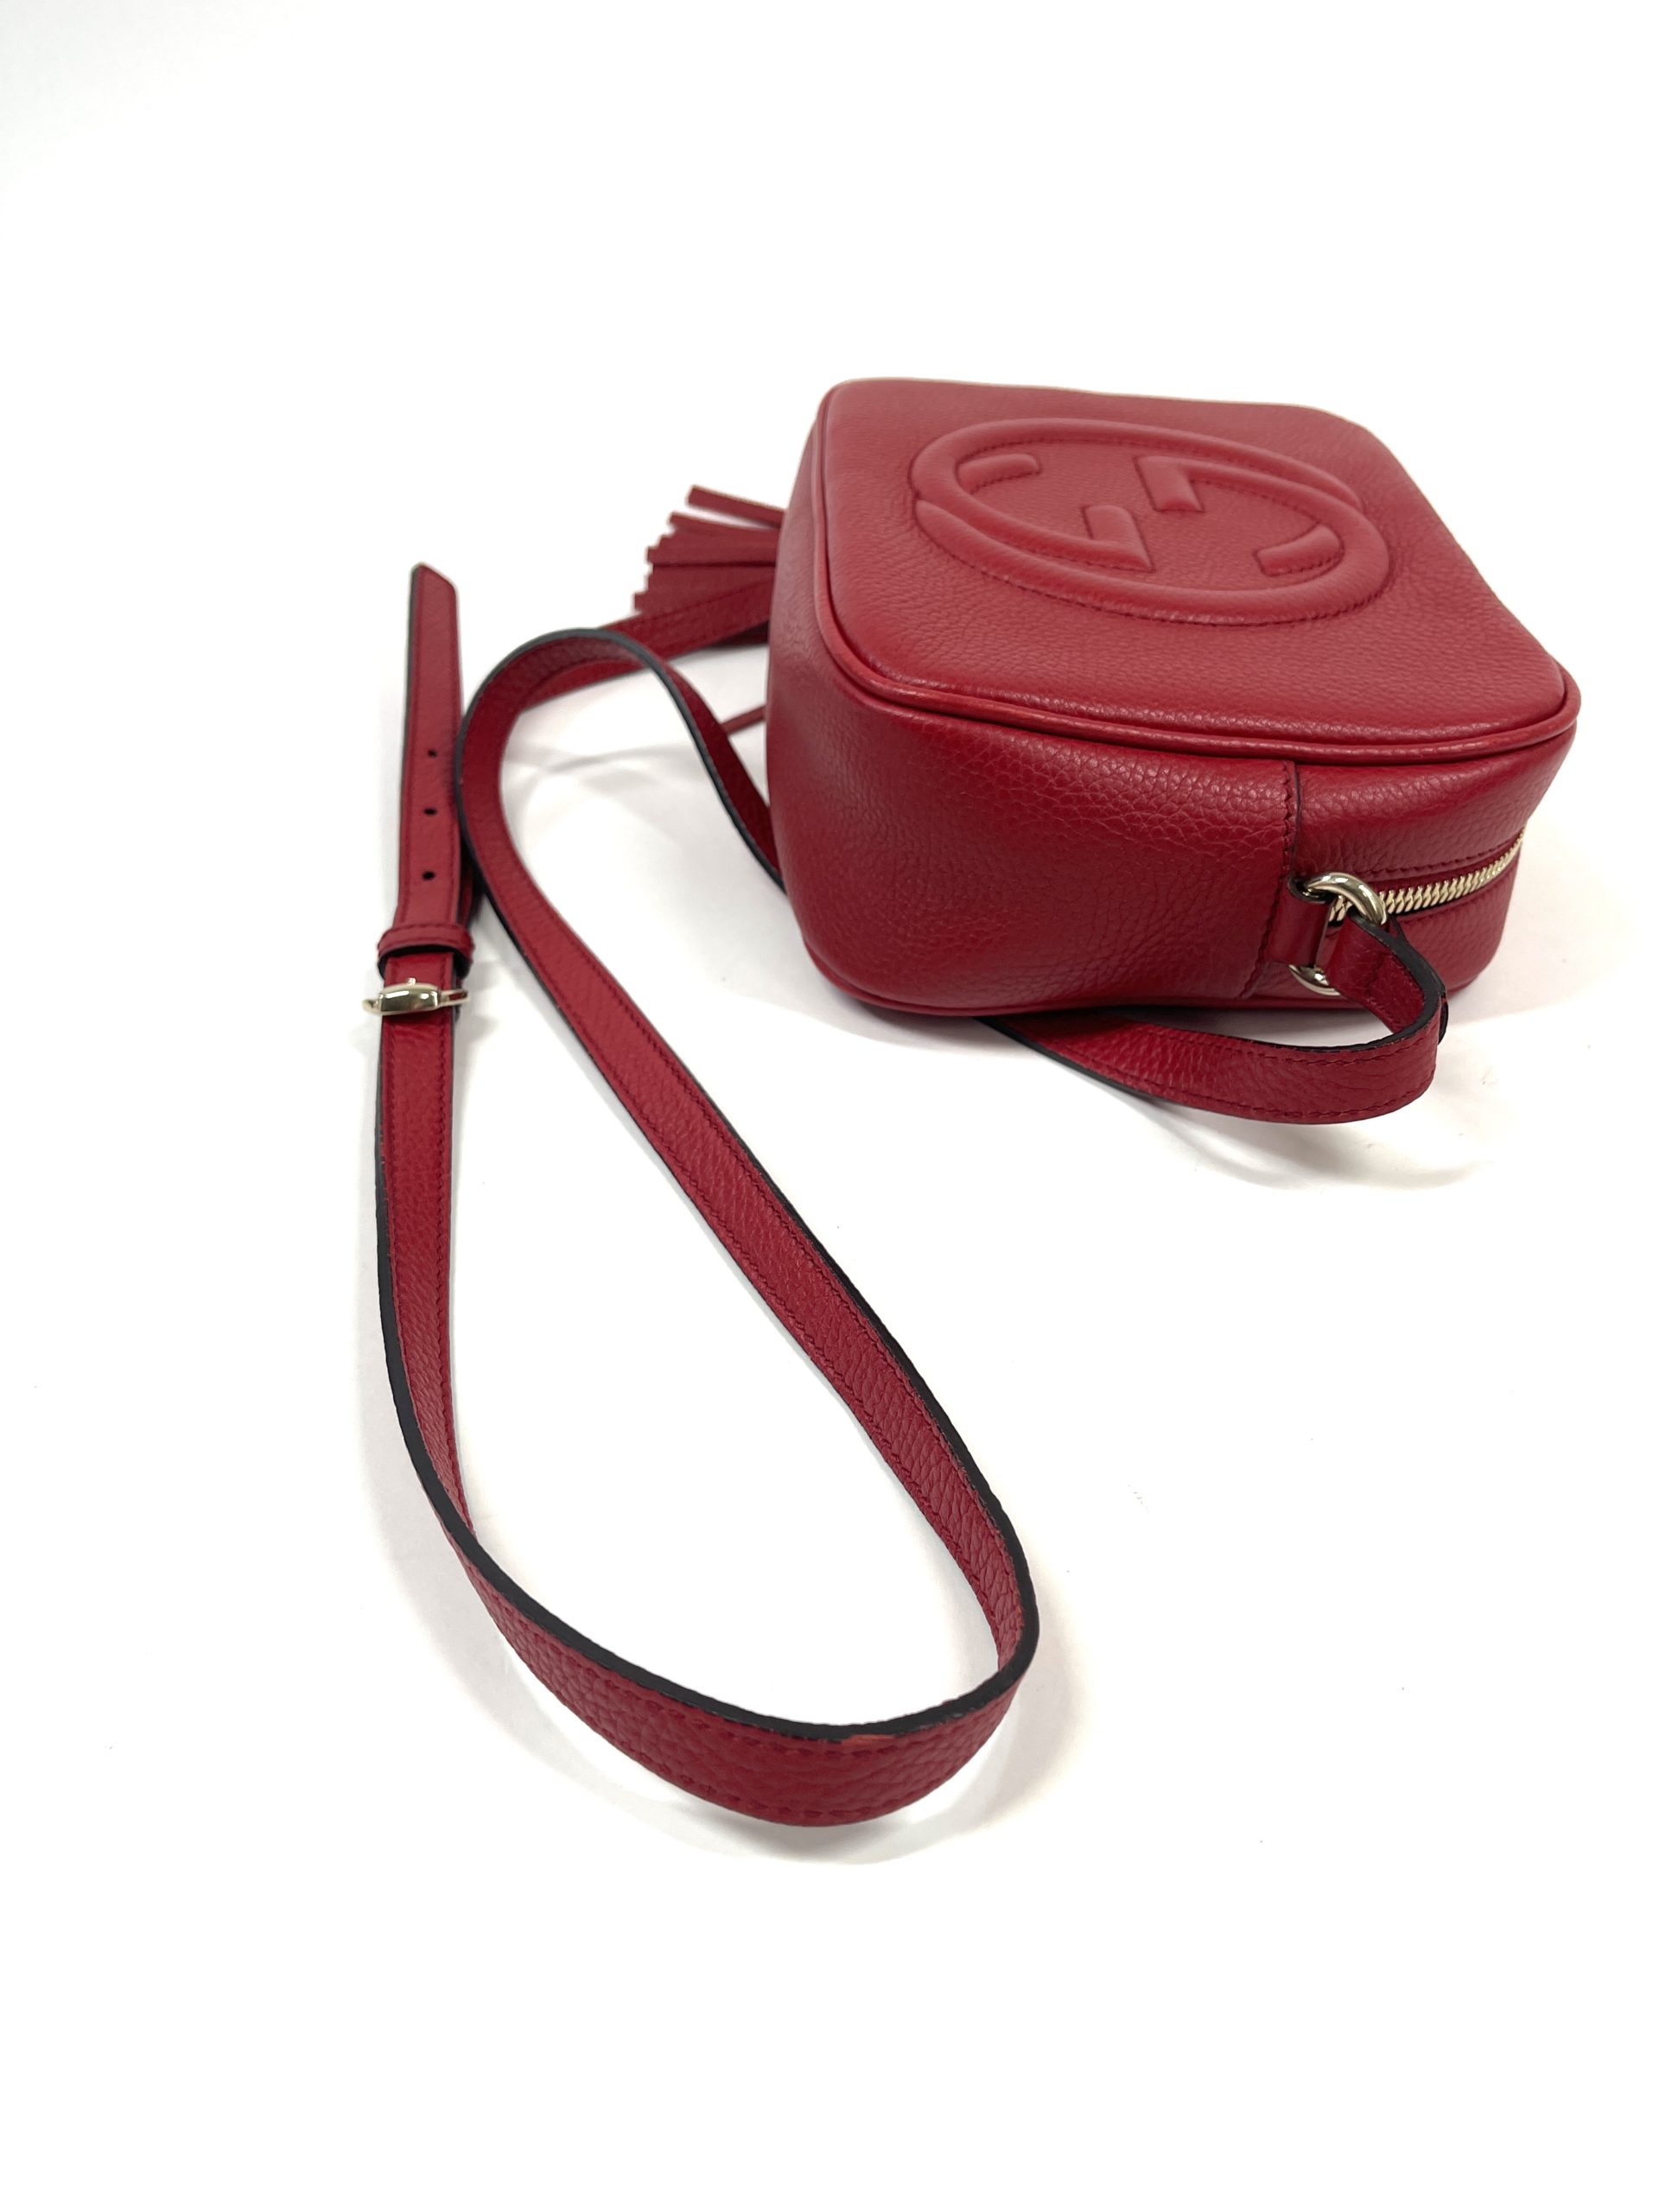 Gucci Soho Red Leather Disco Bag Crossbody - A World Of Goods For You, LLC